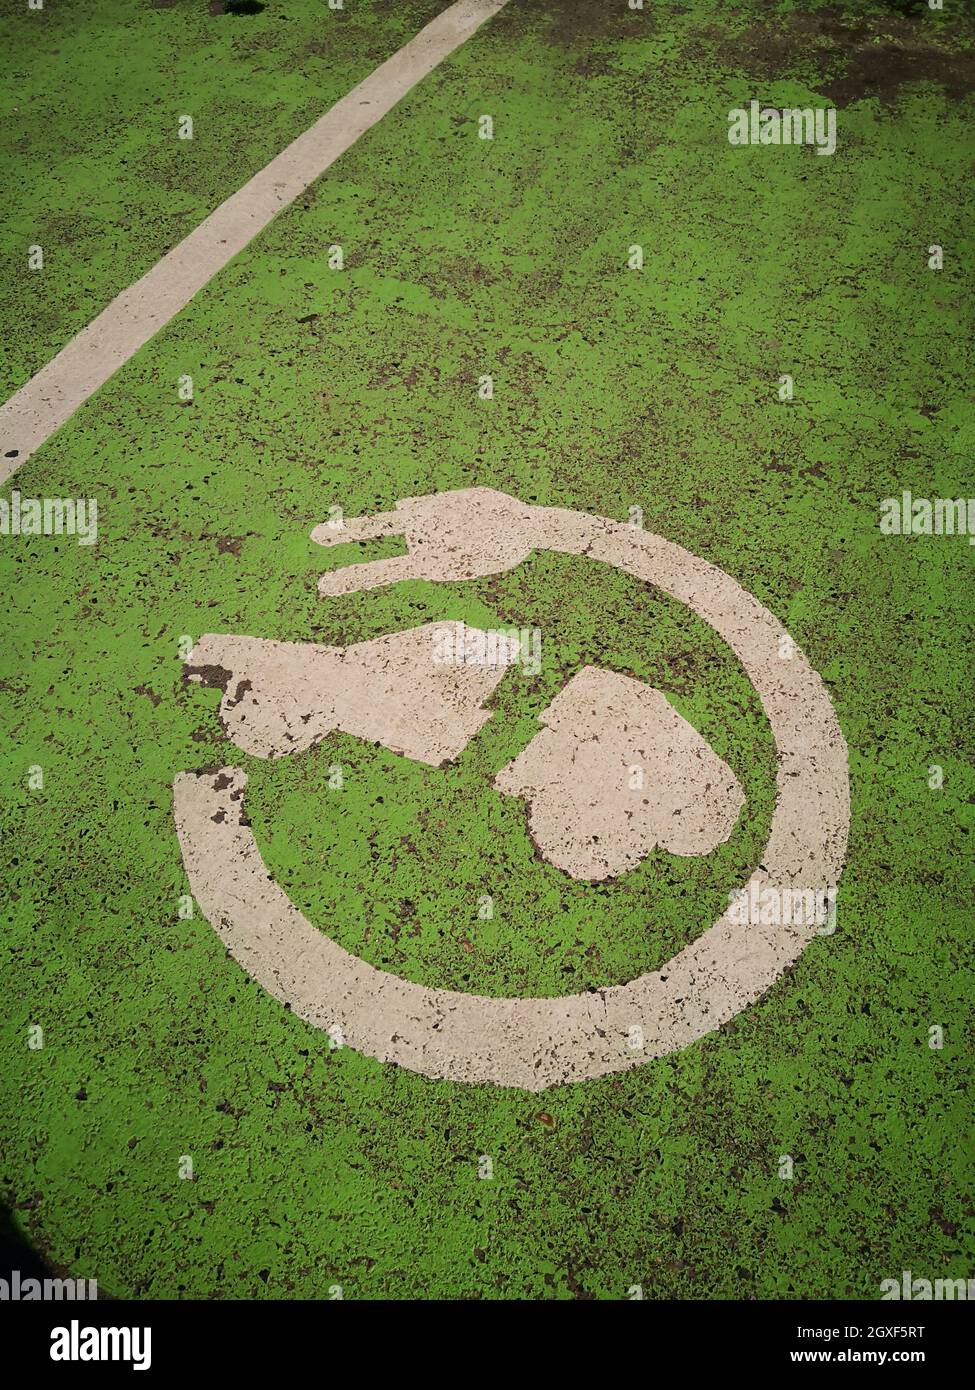 Painted sign for electric vehicle parking on the ground. Stock Photo